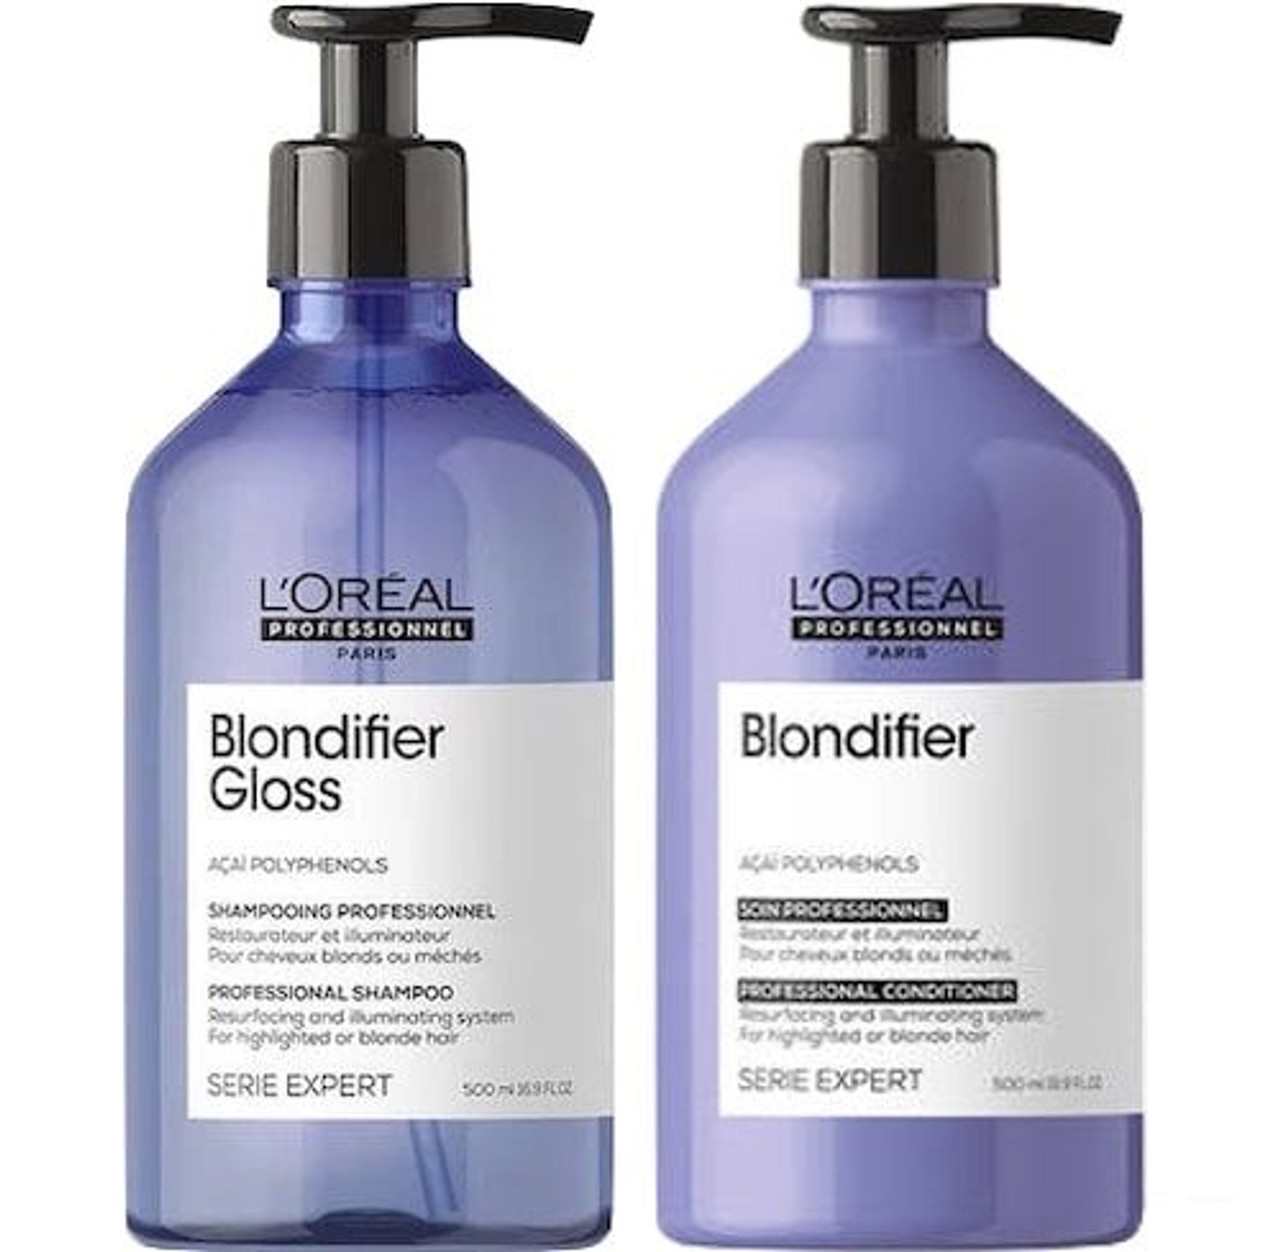 L'Oreal Professional Blondifier Gloss Shampoo and Conditioner 16.9 fl oz Set